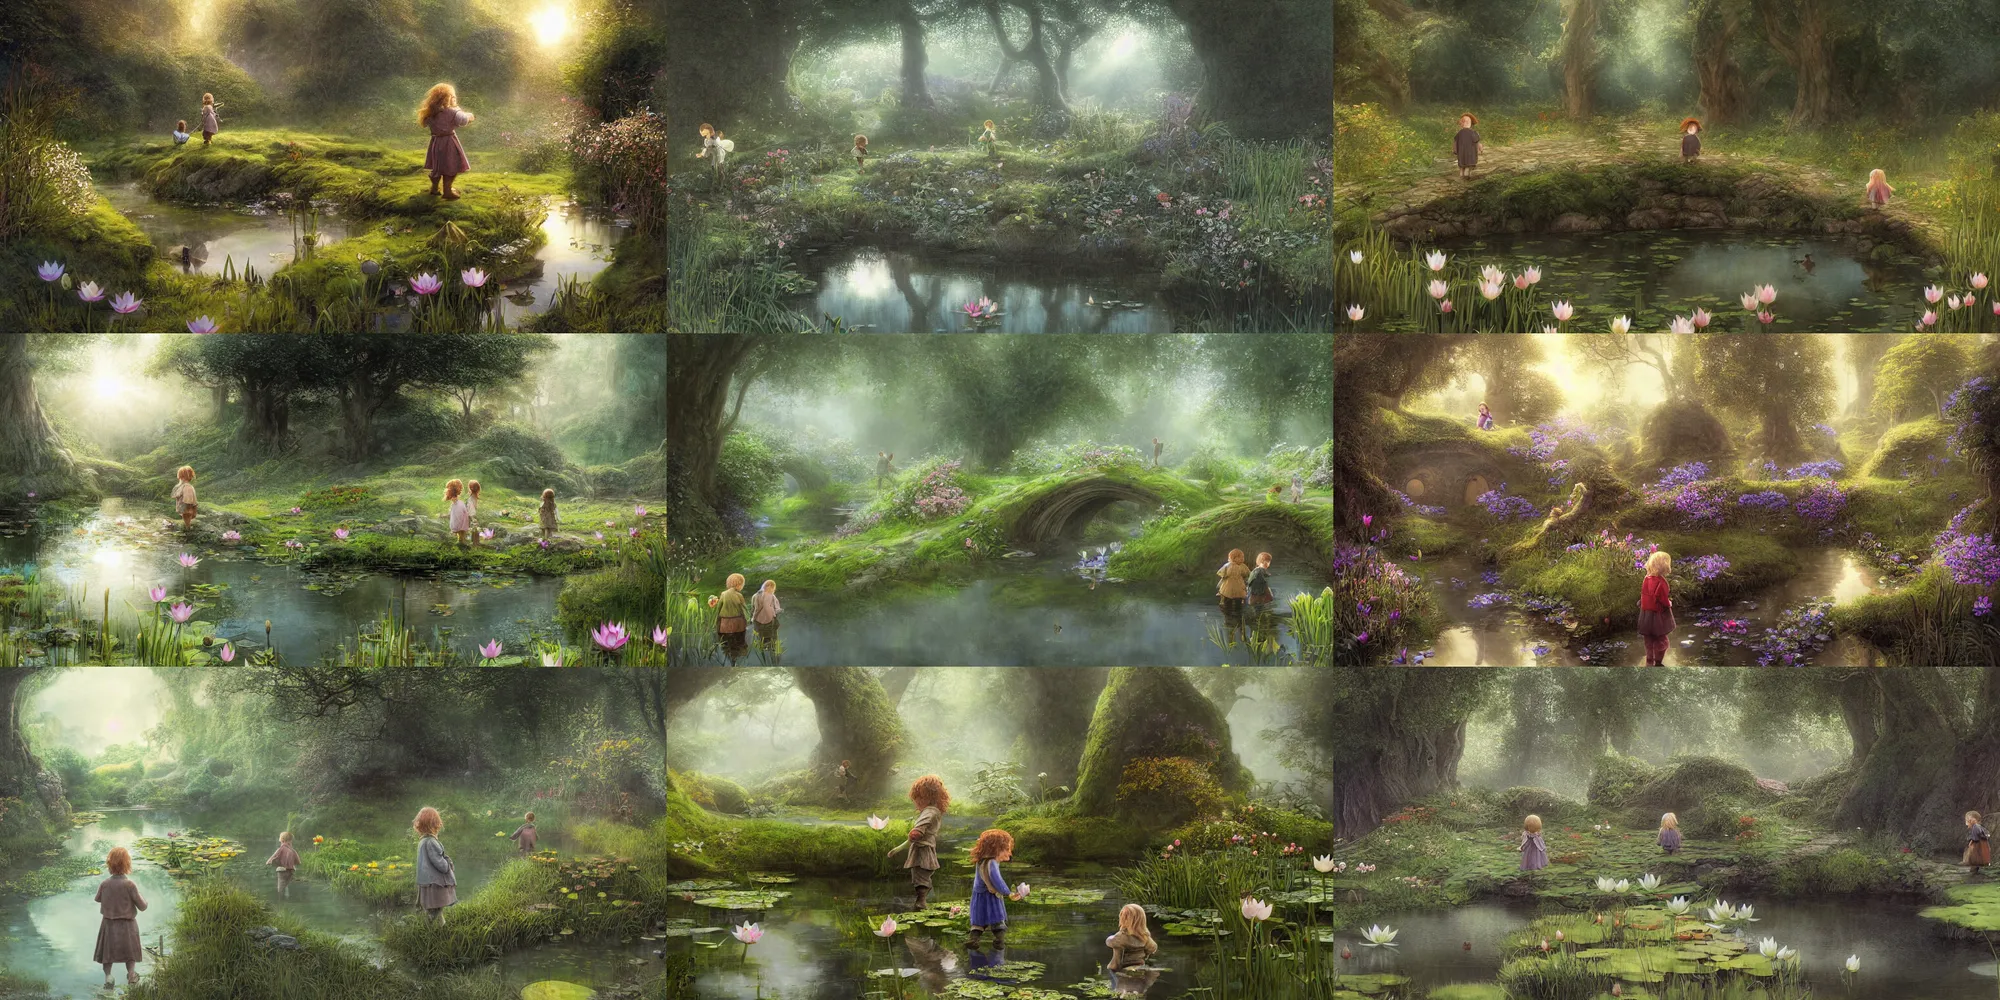 Prompt: two hobbit children backlit carrying flowers near a mirror like pond, by alan lee, springtime flowers and foliage in full bloom, lotus flowers on the water, dark foggy forest background, sunlight filtering through the trees, digital art, art station.